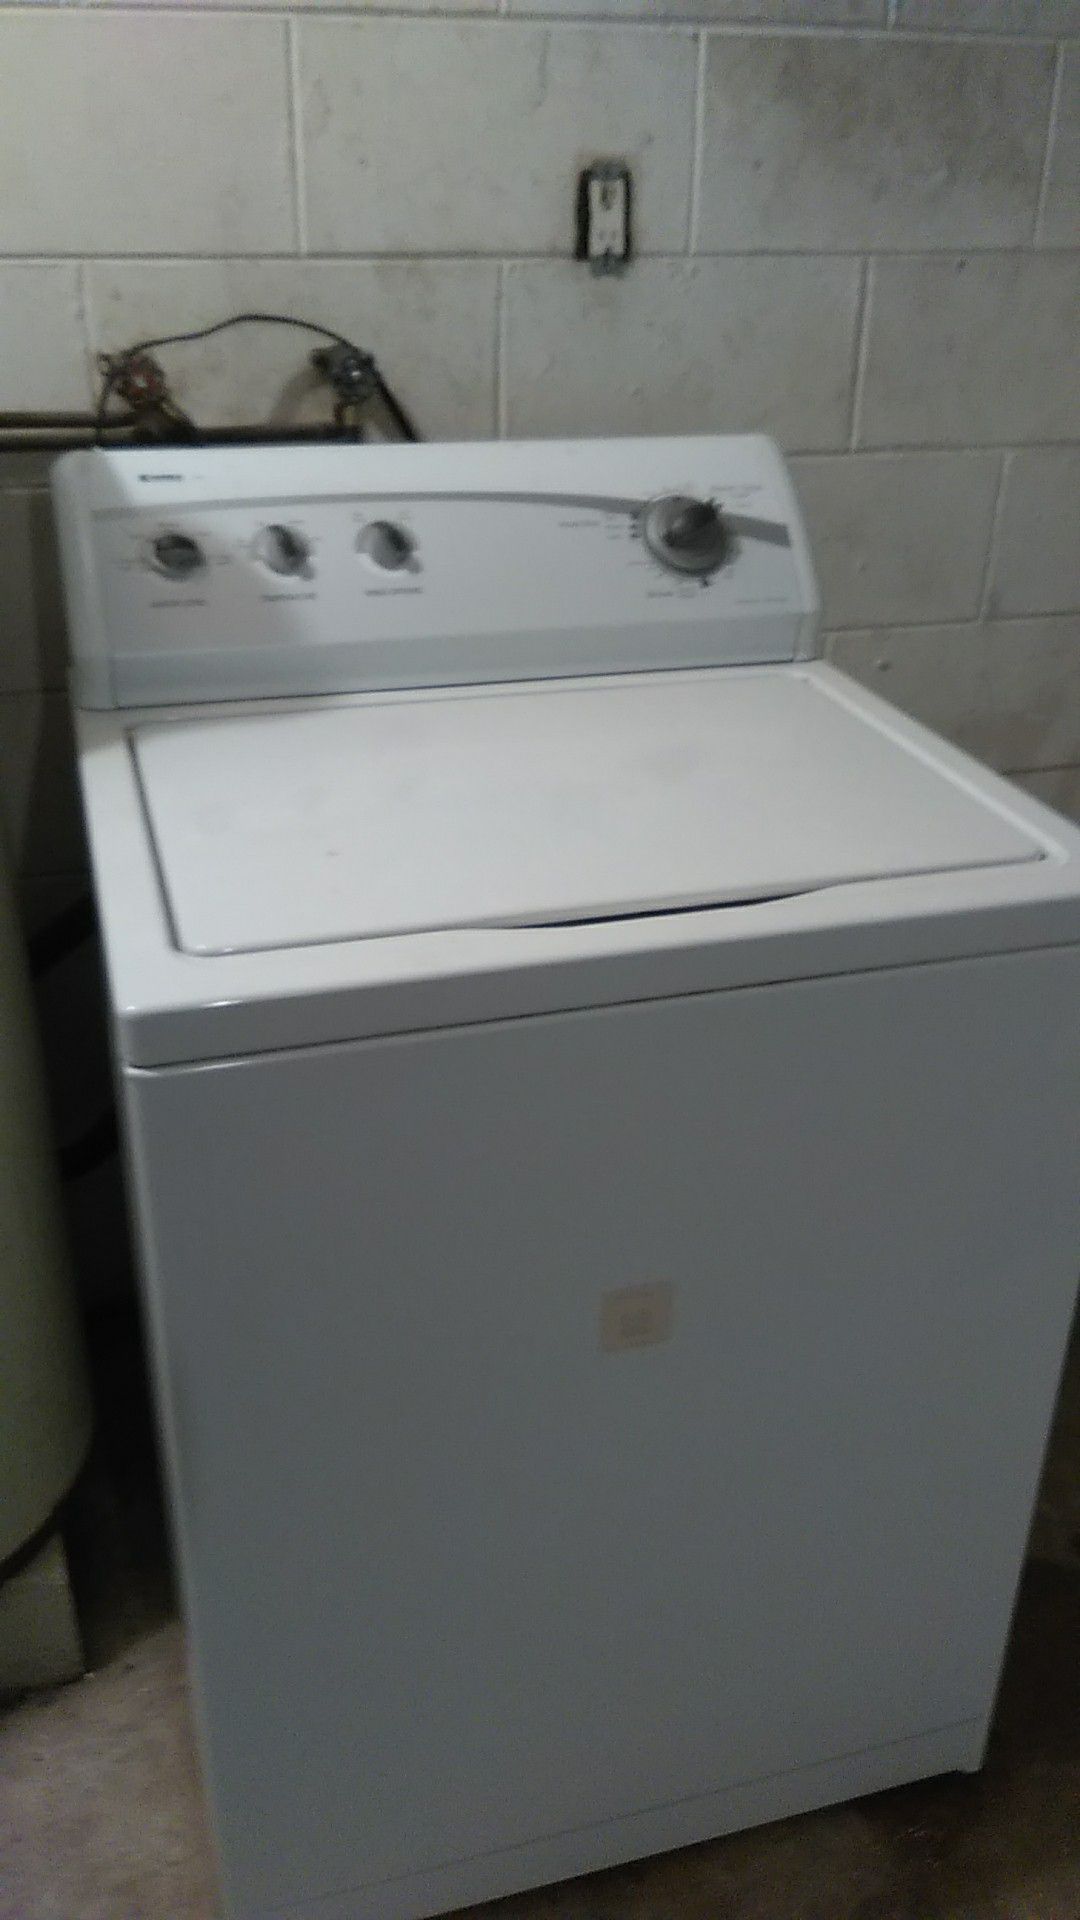 Kenmore 500 series washing machine for sale in Pine Hills works great